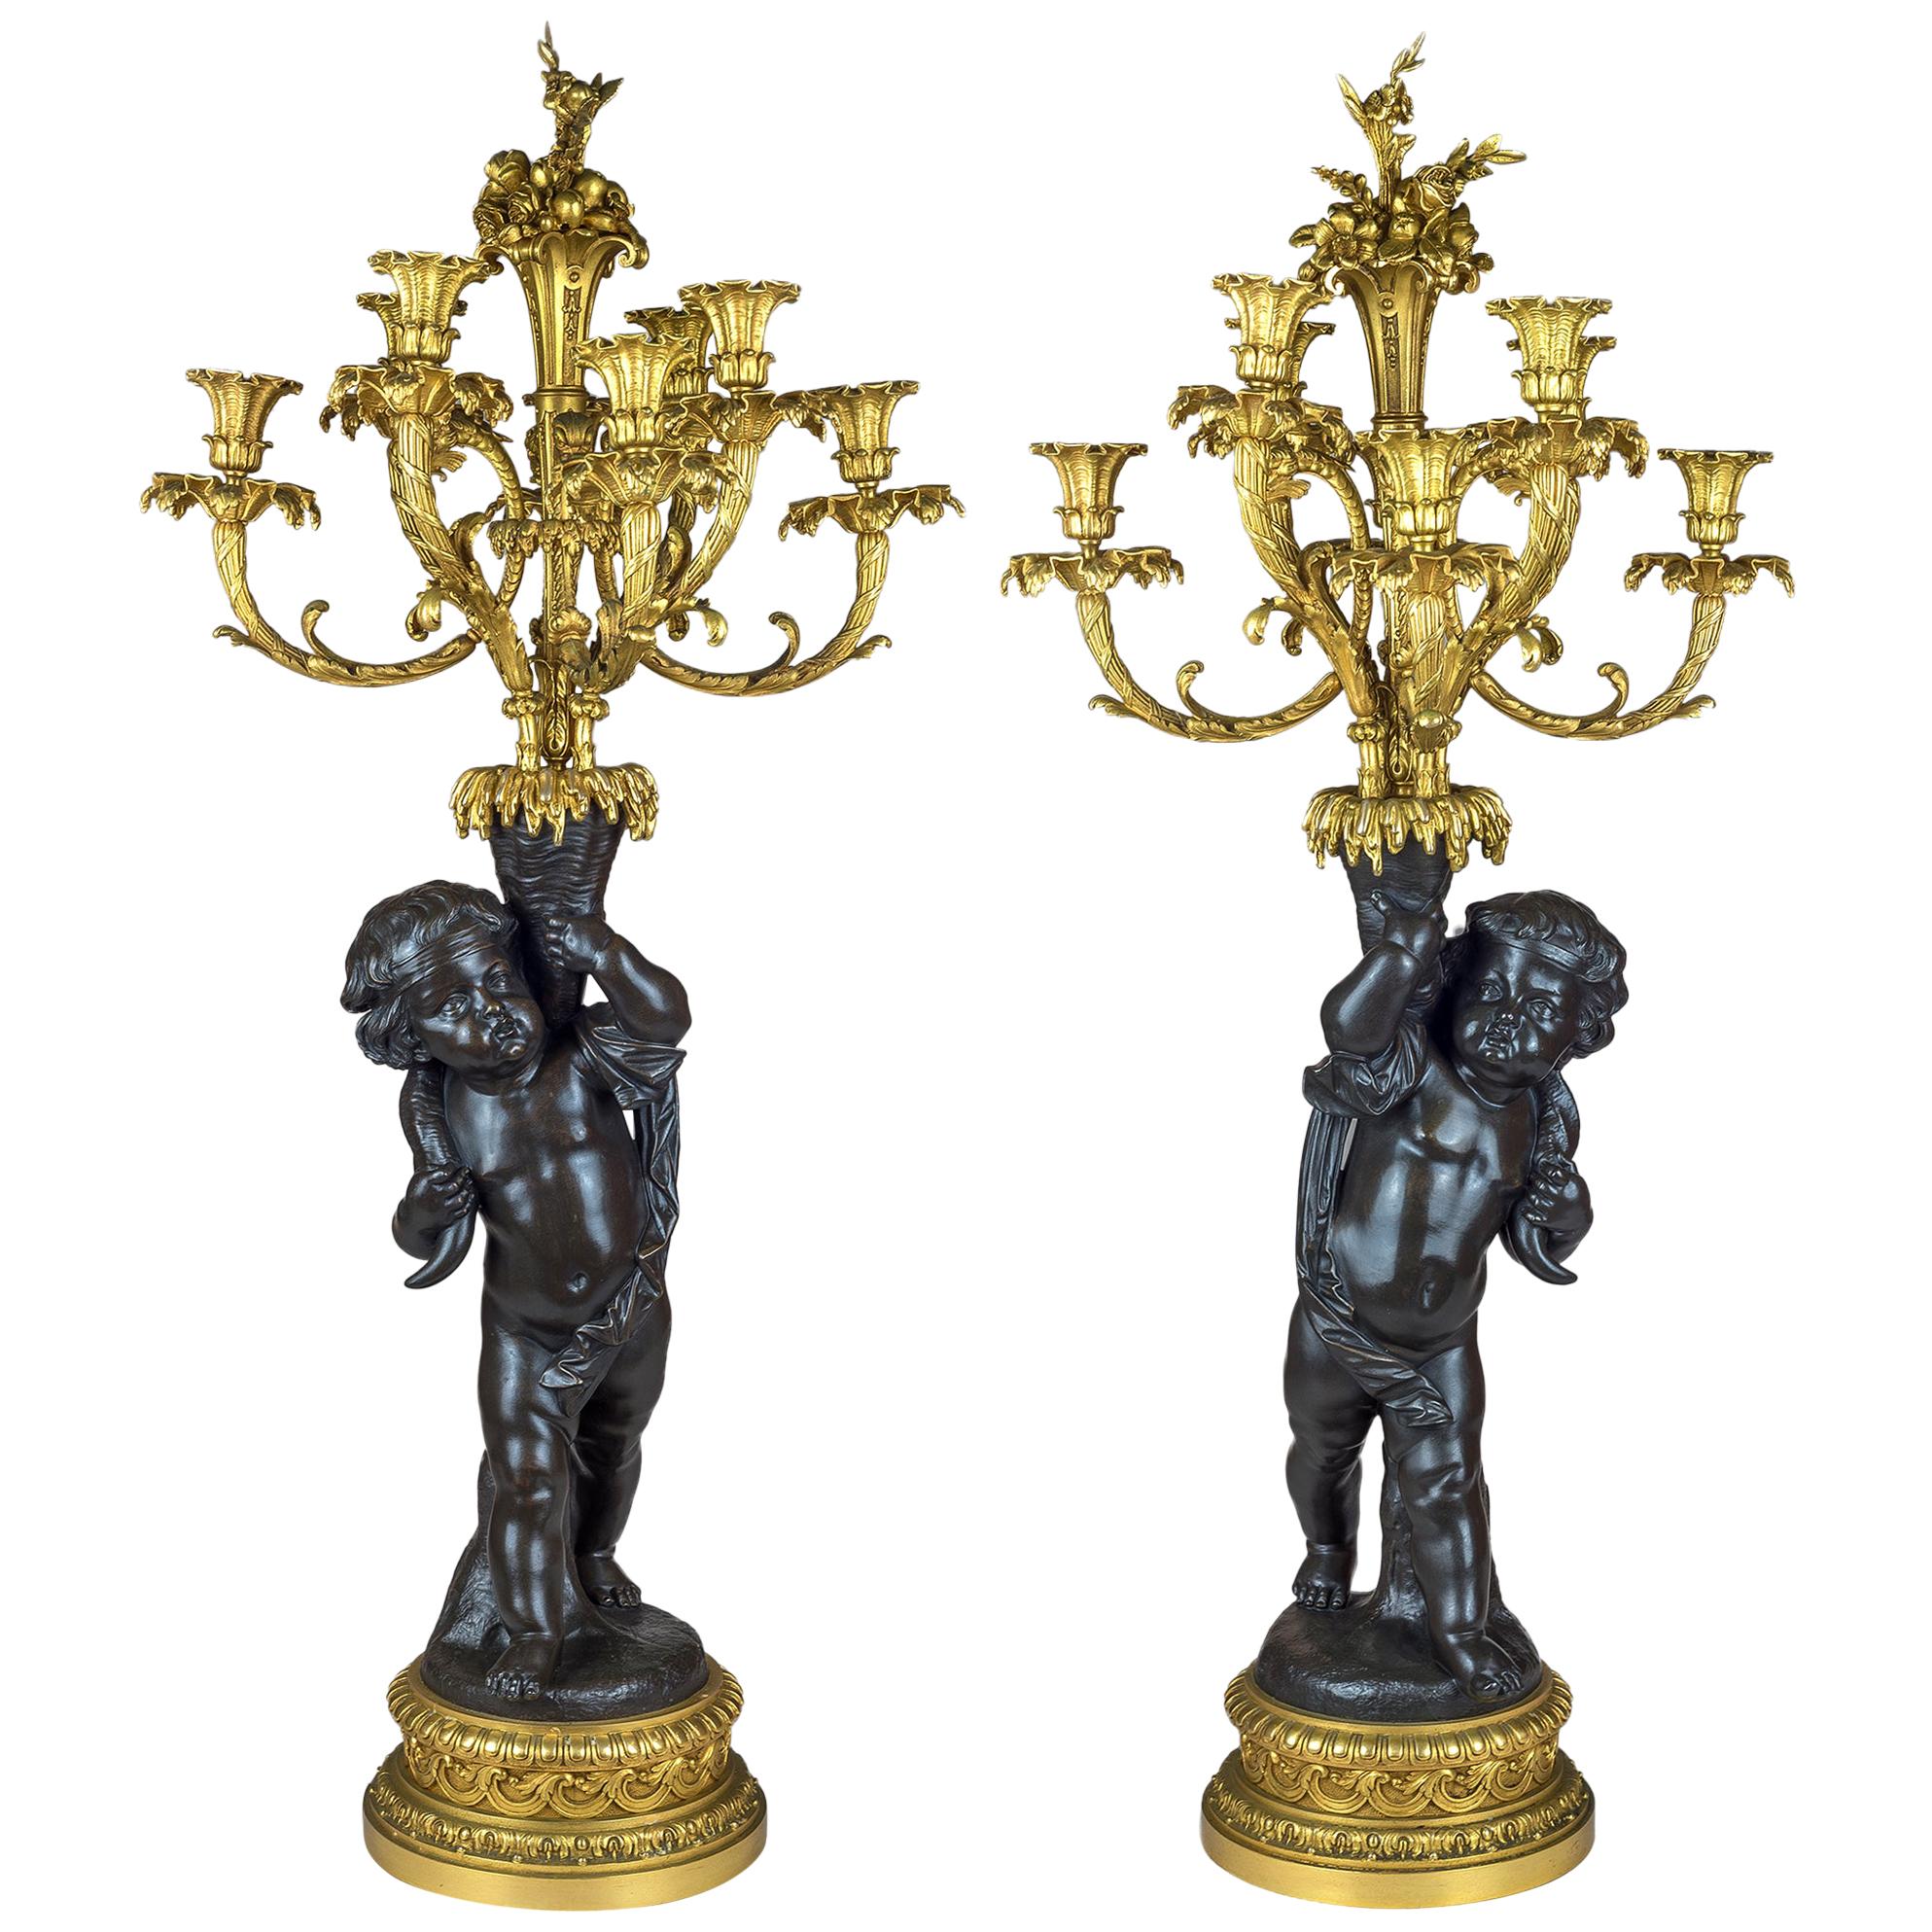 High Quality Pair of Patinated and Gilt Bronze Figural Candelabras